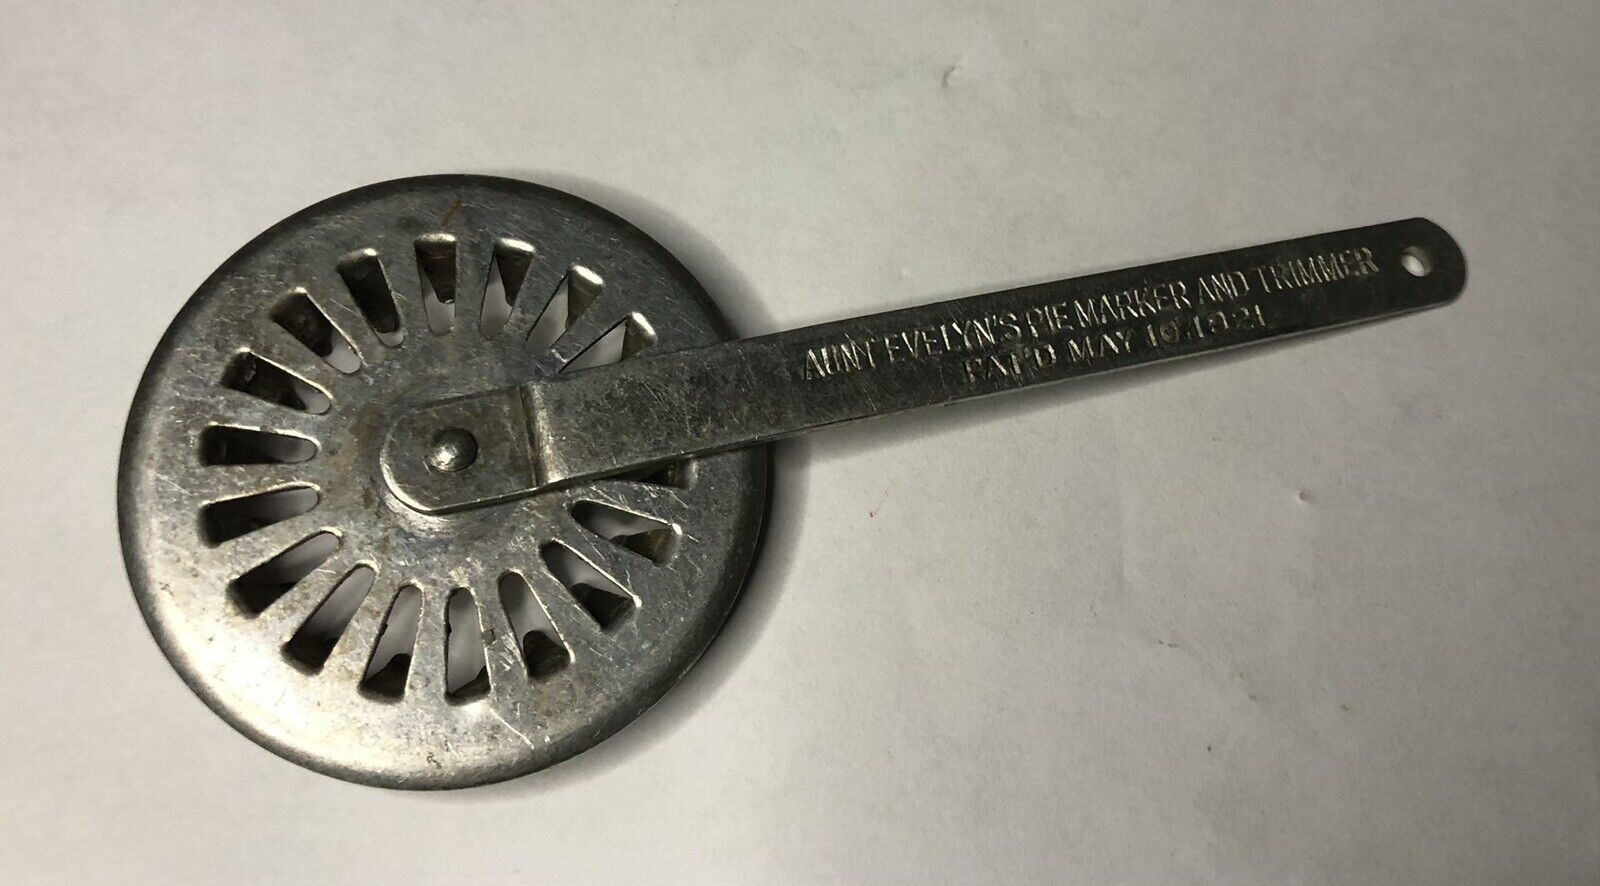 Antique Vintage Aunt Evelyn's Pie Maker And Trimmer Pat' D May 10,1921 Aluminum